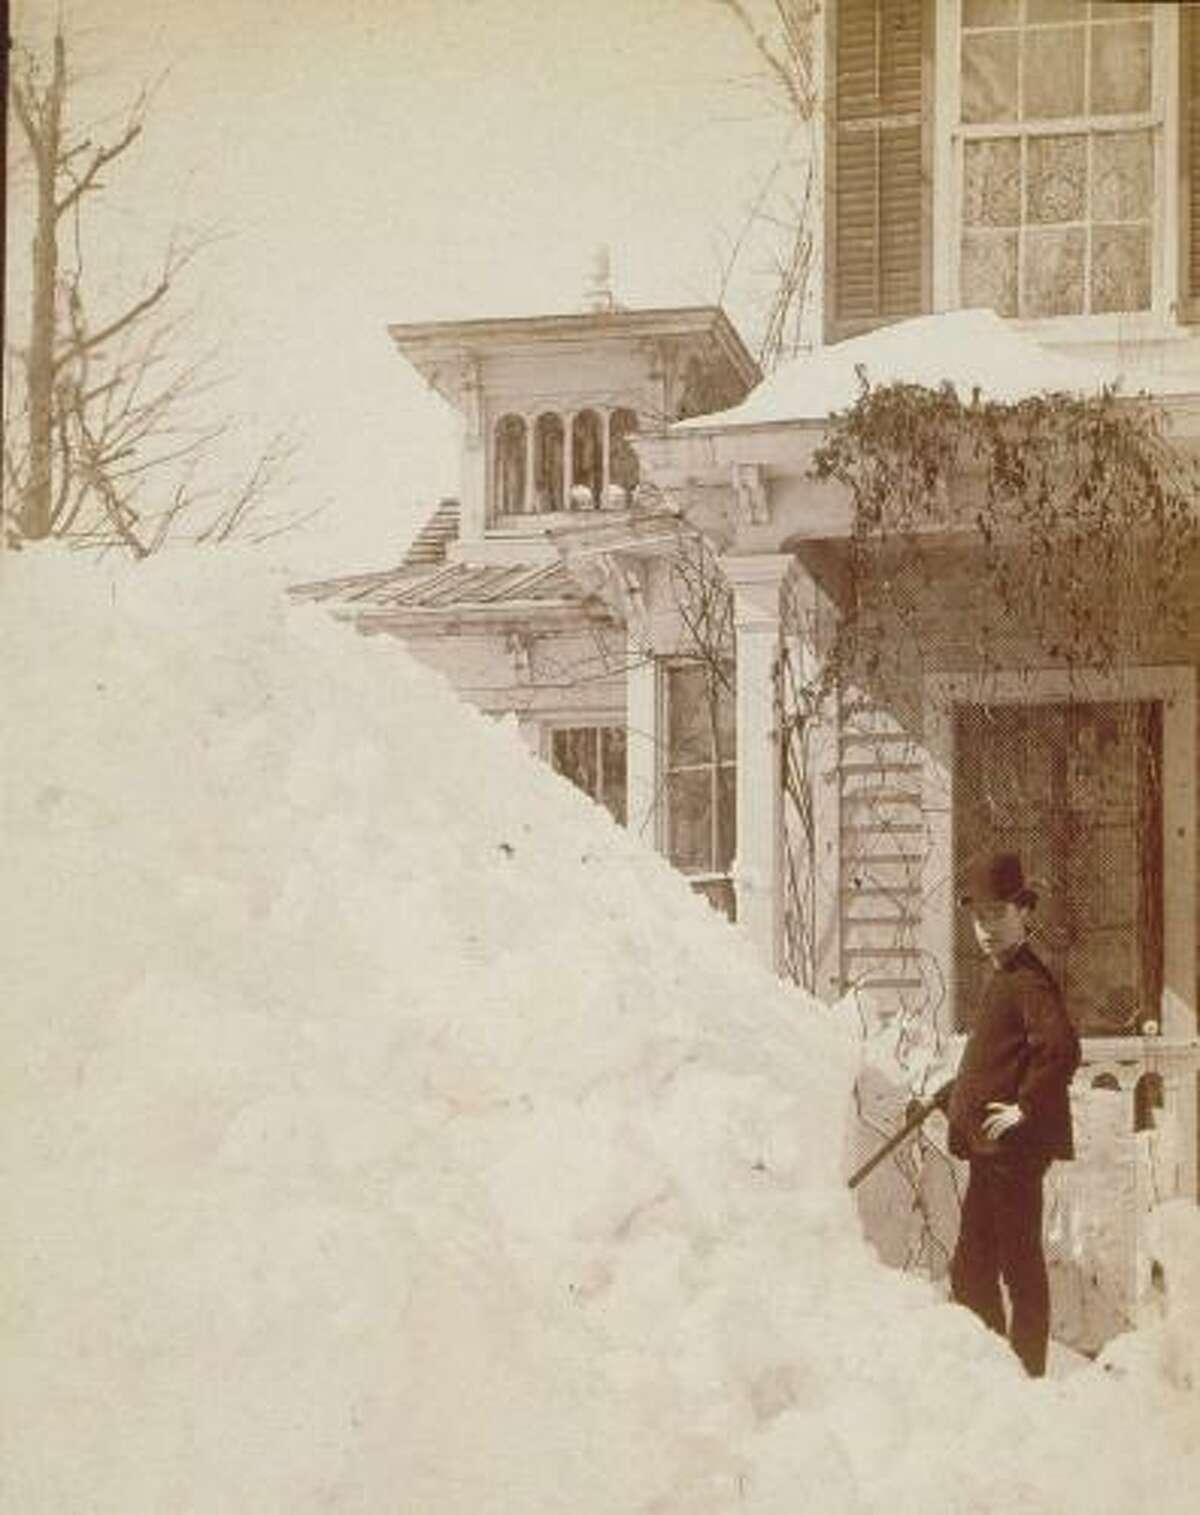 A young man stands beside a large pile of snow at 380 Main St., Danbury, after the Blizzard of 1888, which started on March 12.